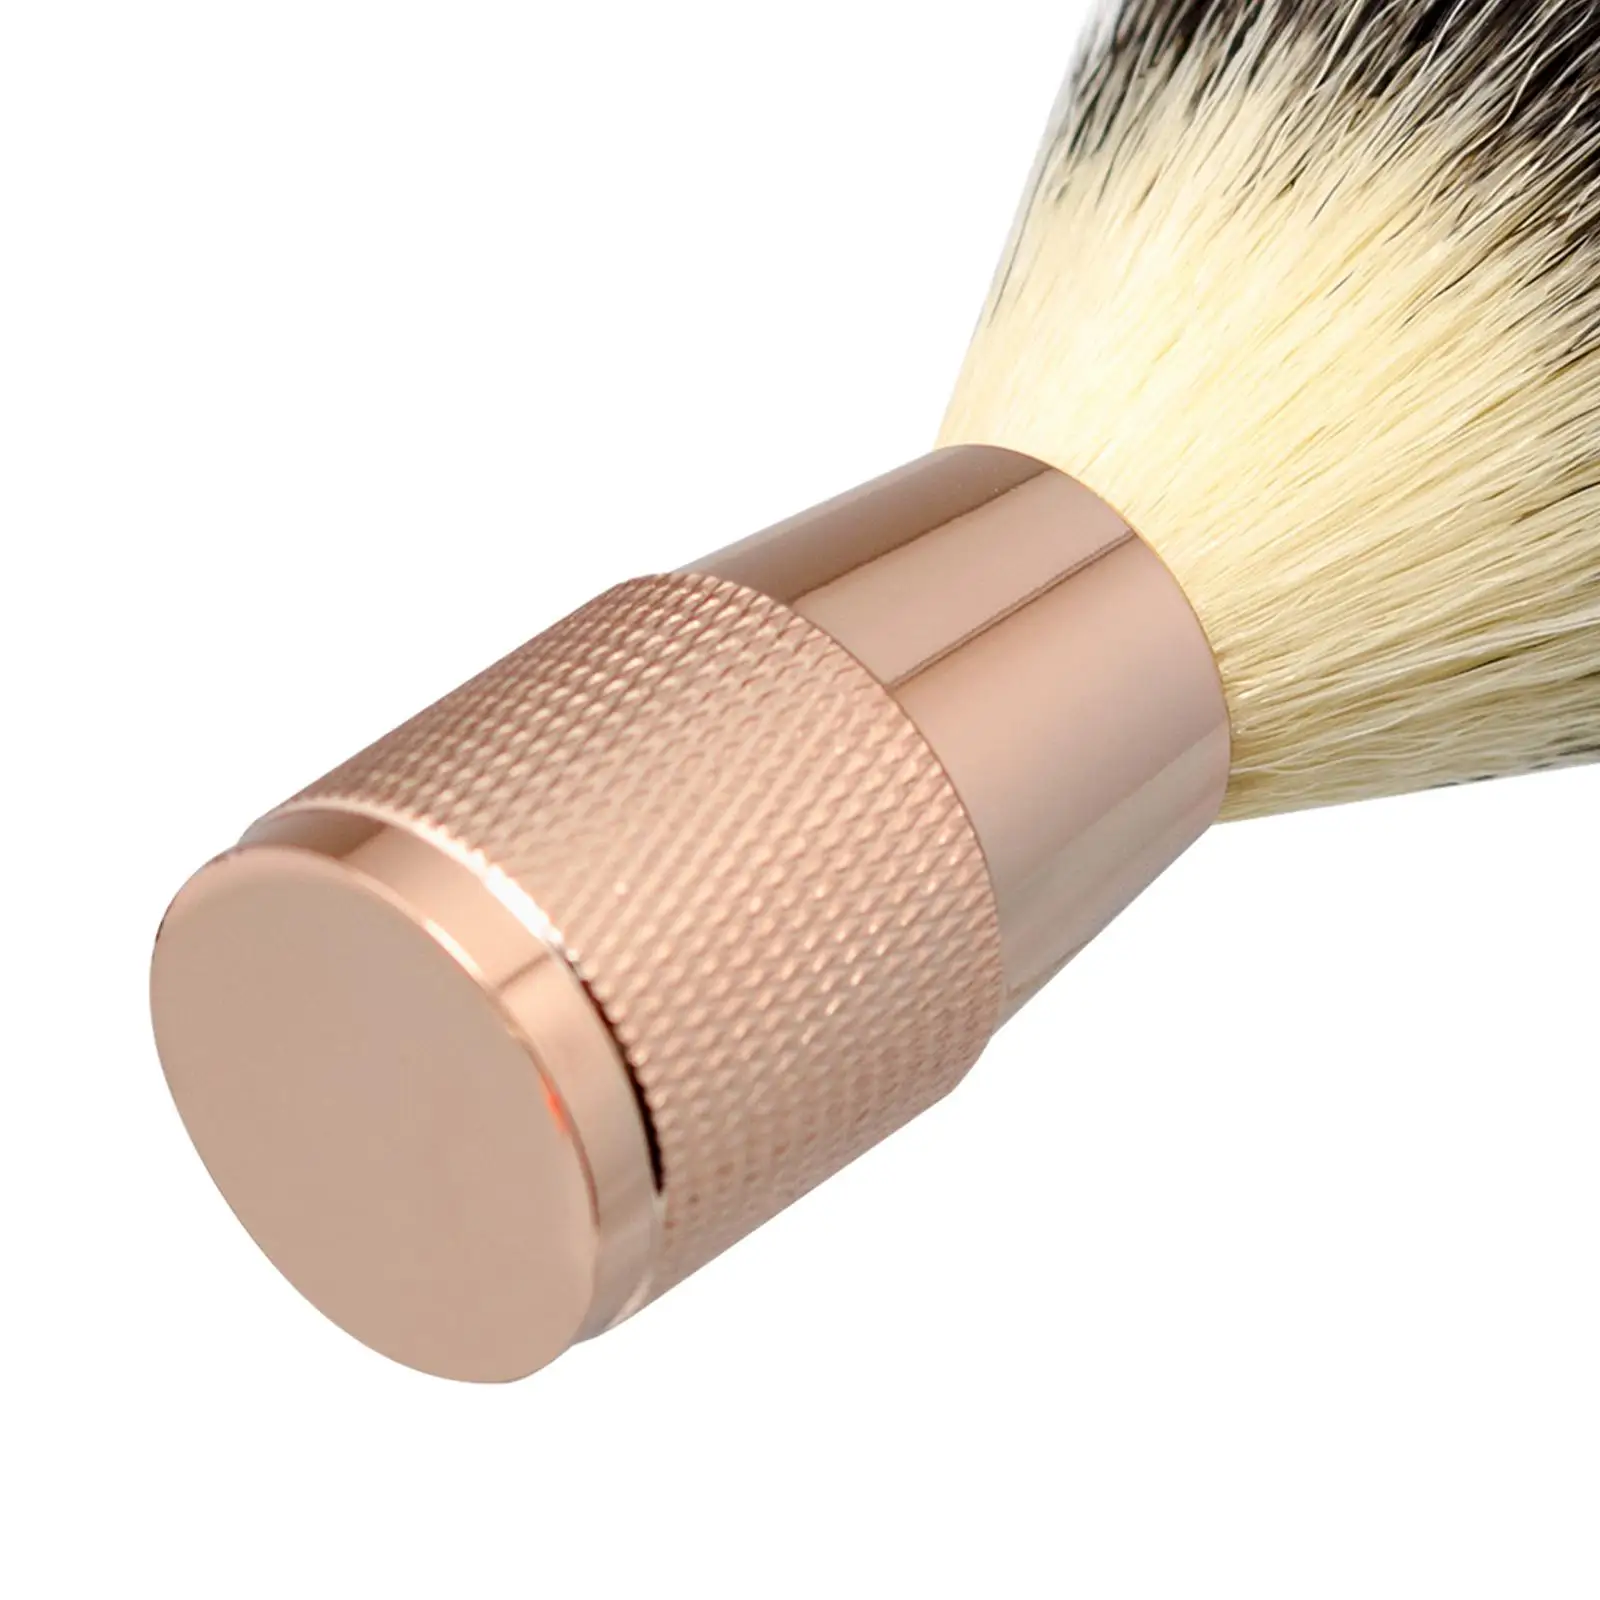 Shaving Brush for Men Handled Accessories for Your Father Husband Comfortable Length 4.3inch Shave Cream Brush Metal Handle